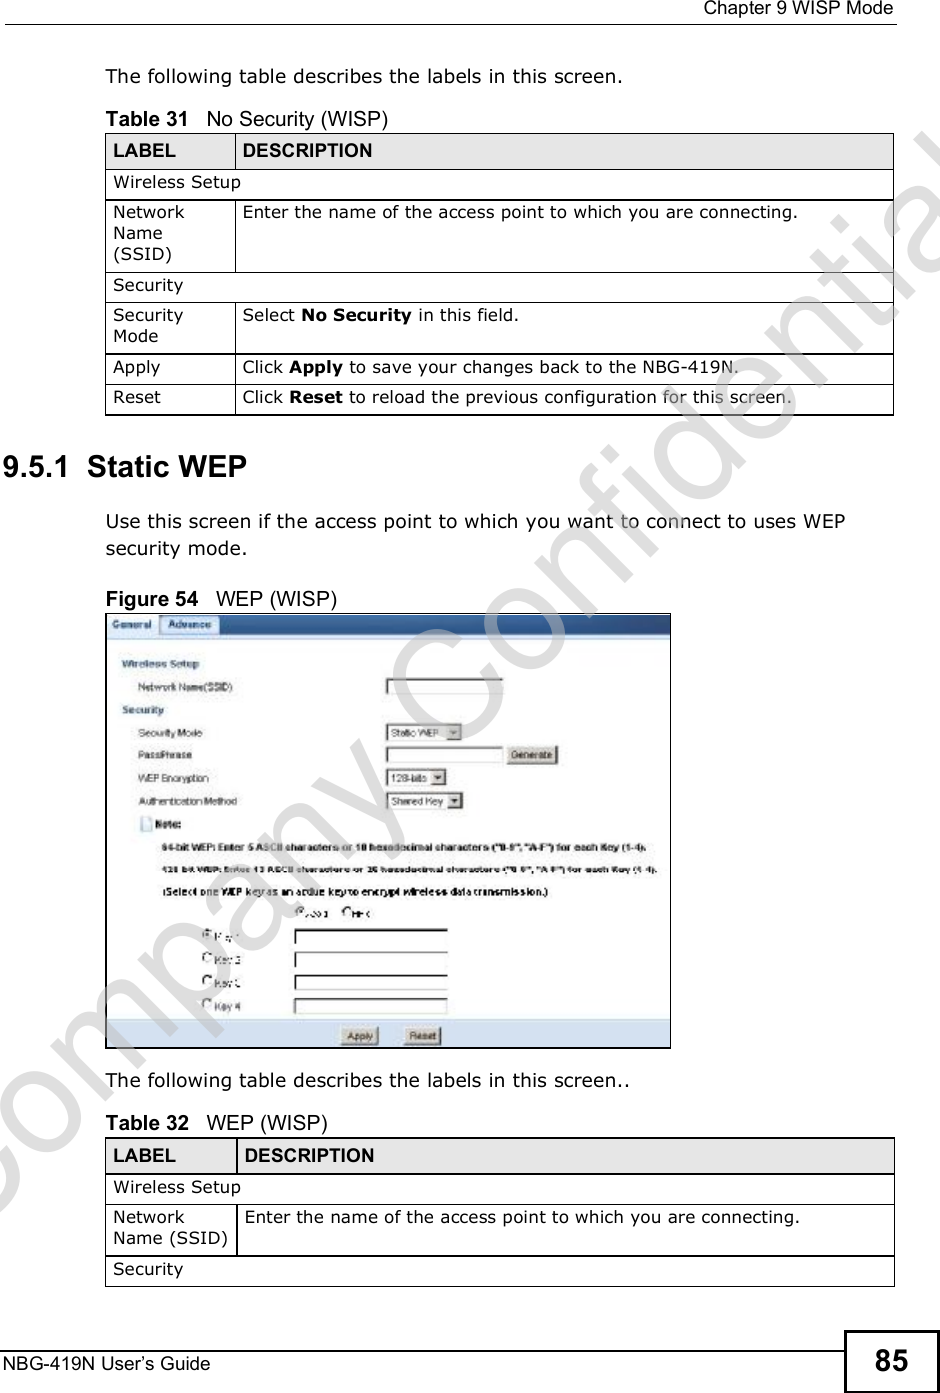  Chapter 9WISP ModeNBG-419N User s Guide 85The following table describes the labels in this screen. 9.5.1  Static WEPUse this screen if the access point to which you want to connect to uses WEP security mode.Figure 54   WEP (WISP)The following table describes the labels in this screen..Table 31   No Security (WISP)LABEL  DESCRIPTIONWireless SetupNetwork Name (SSID)Enter the name of the access point to which you are connecting.SecuritySecurity ModeSelect No Security in this field.Apply Click Apply to save your changes back to the NBG-419N.Reset Click Reset to reload the previous configuration for this screen.Table 32   WEP (WISP)LABEL DESCRIPTIONWireless SetupNetwork Name (SSID)Enter the name of the access point to which you are connecting.SecurityCompany Confidential